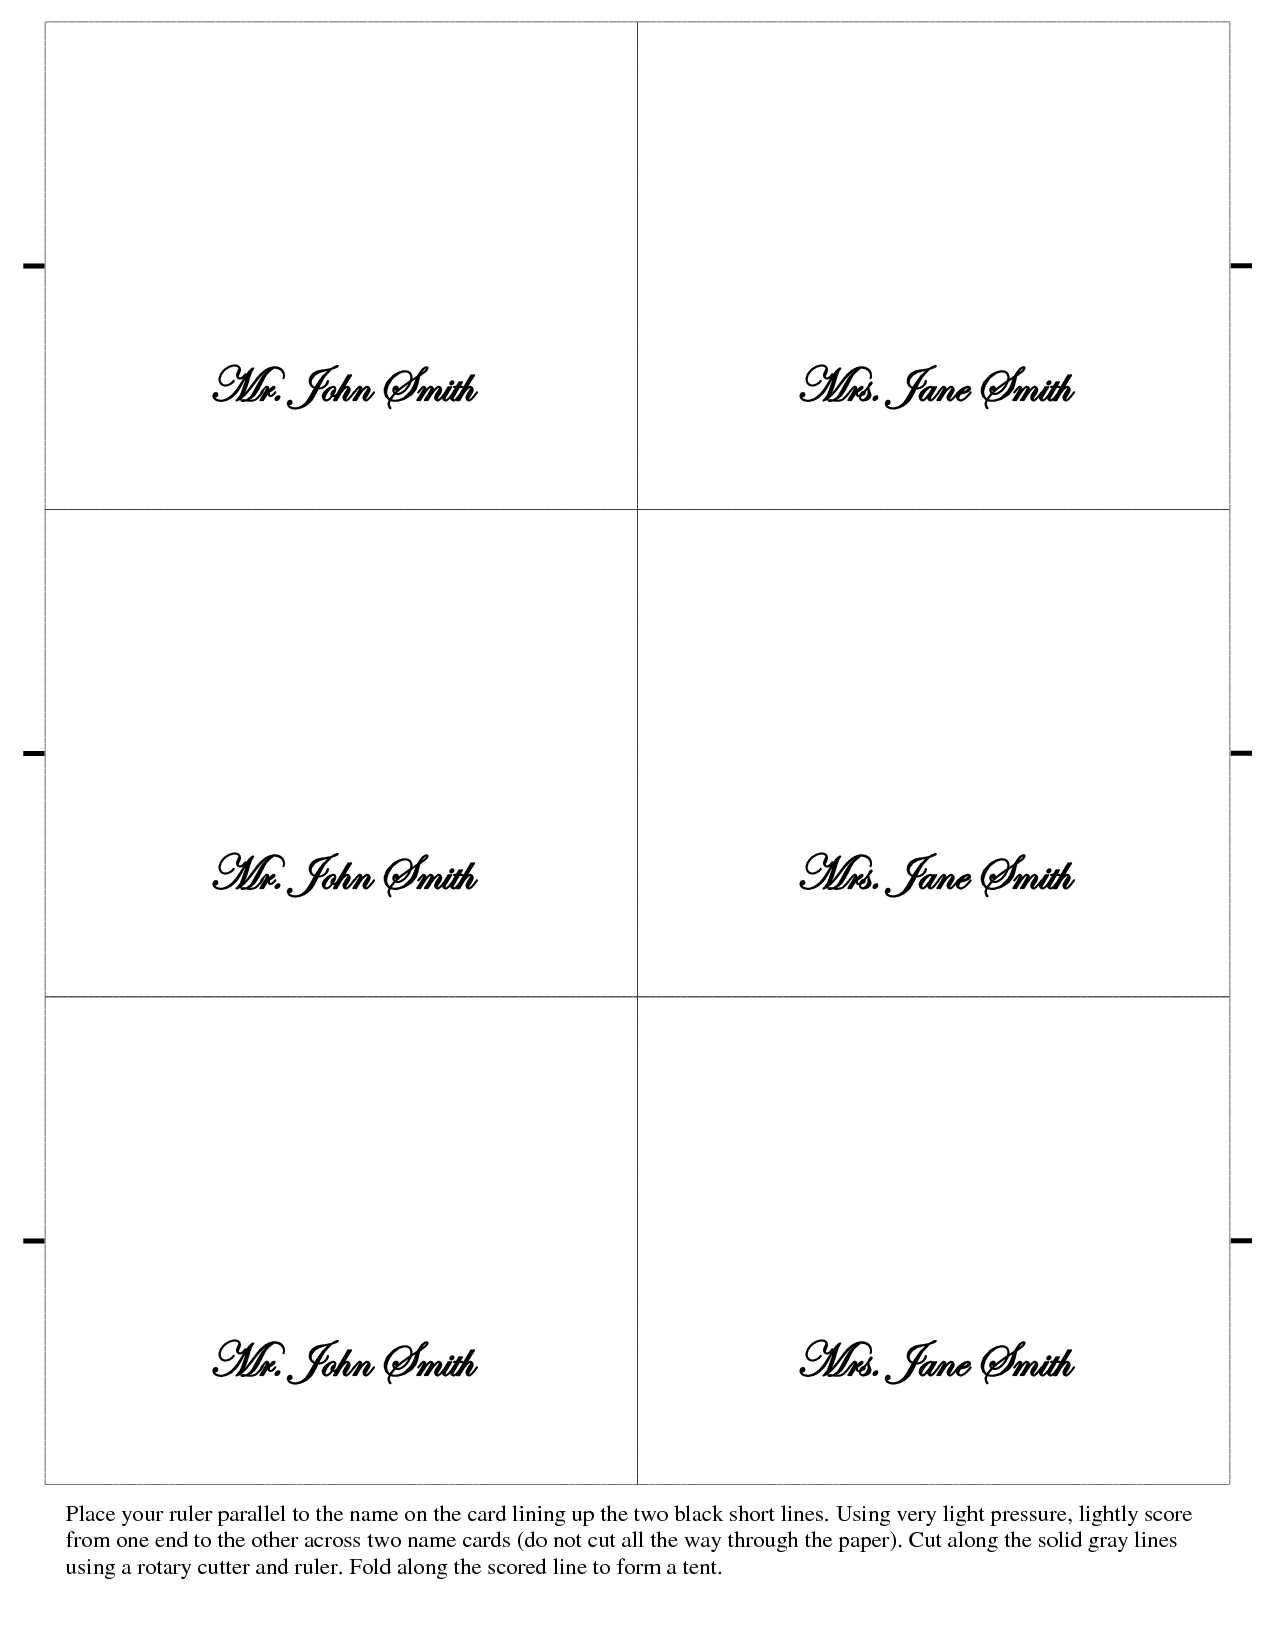 003 Free Place Card Template Ideas Table Mwd108673 Vert In Free Place Card Templates 6 Per Page